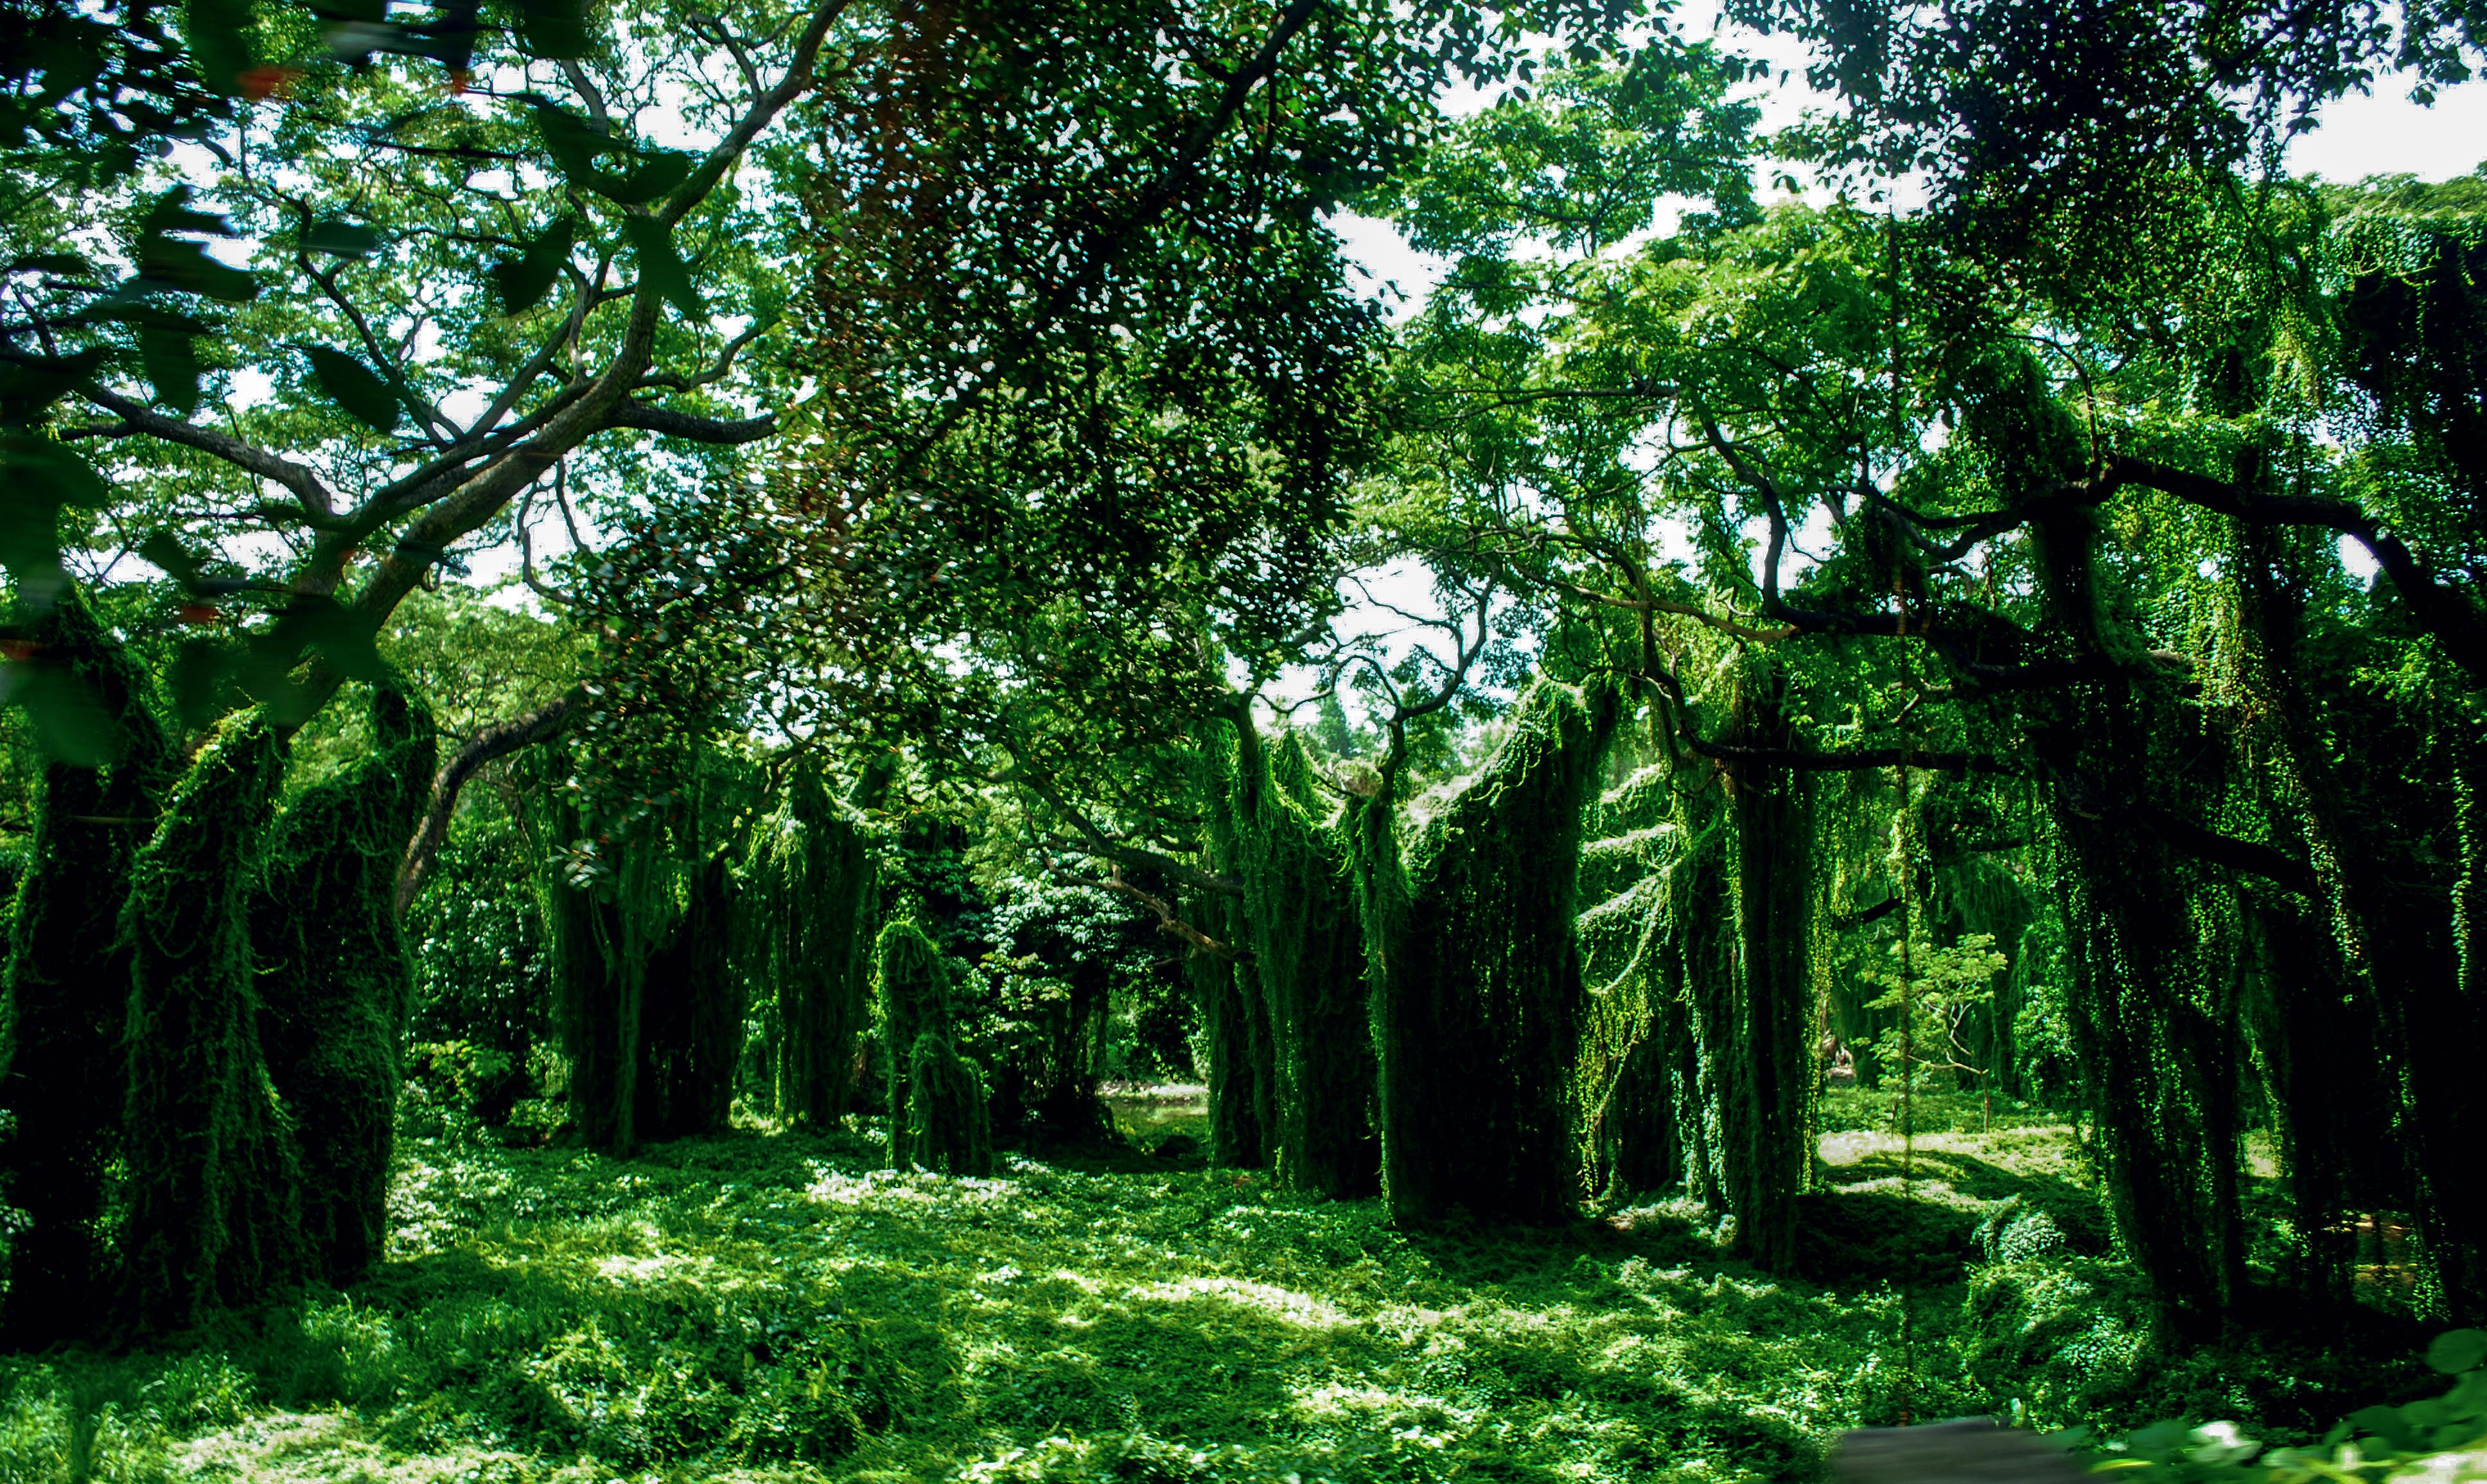 Landscape Photography. The Habana rainforest, a magic place inside the city, hidden, a place to walk, have a picnic but also where the people make offering to their saints. (La Habana, 2011)